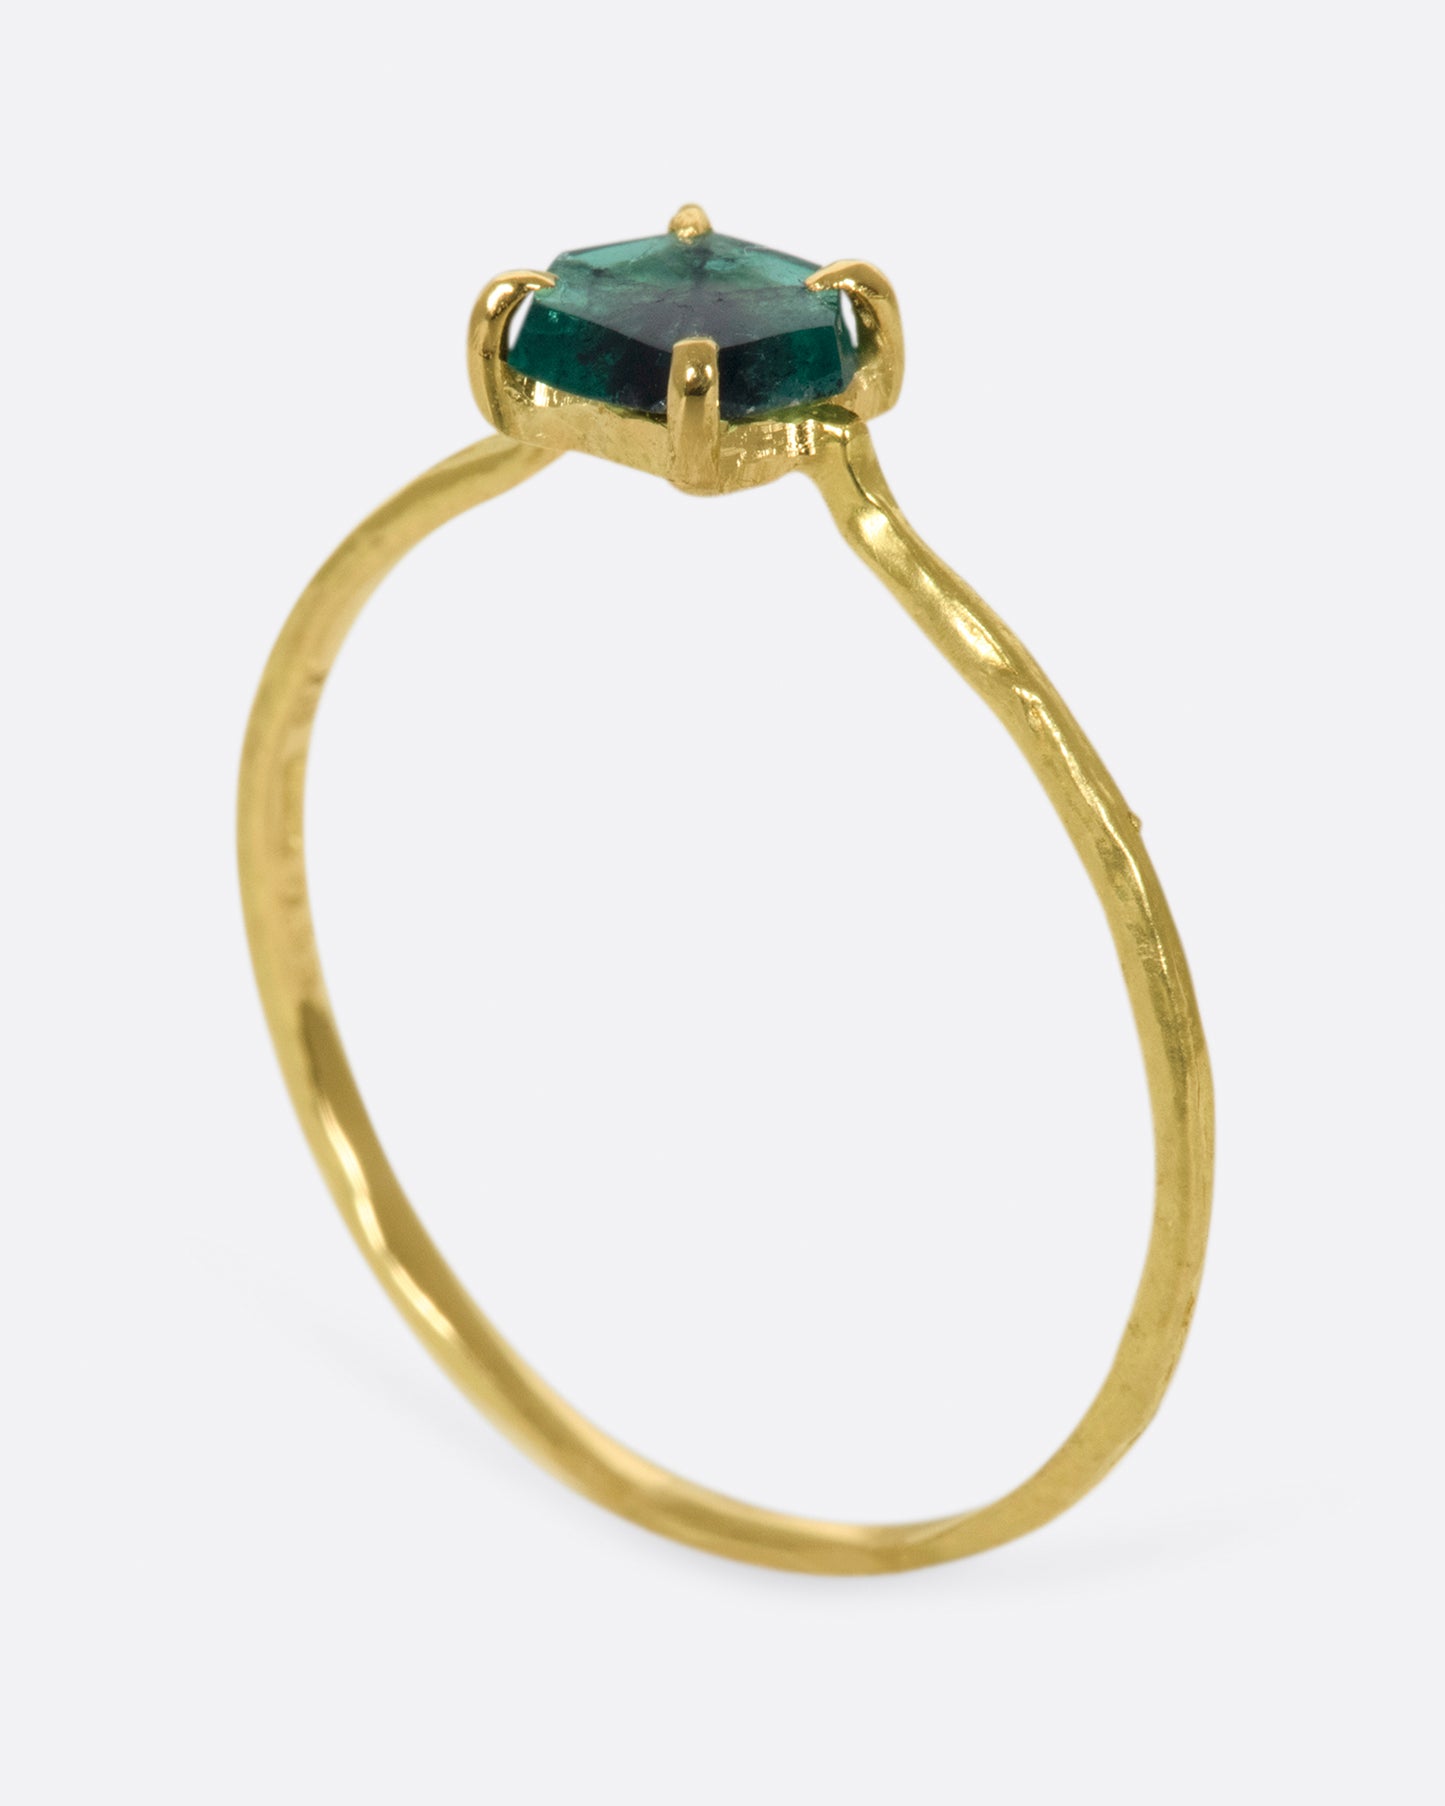 The hexagonal cut of complements the spoke-like pattern on the interior of this emerald.